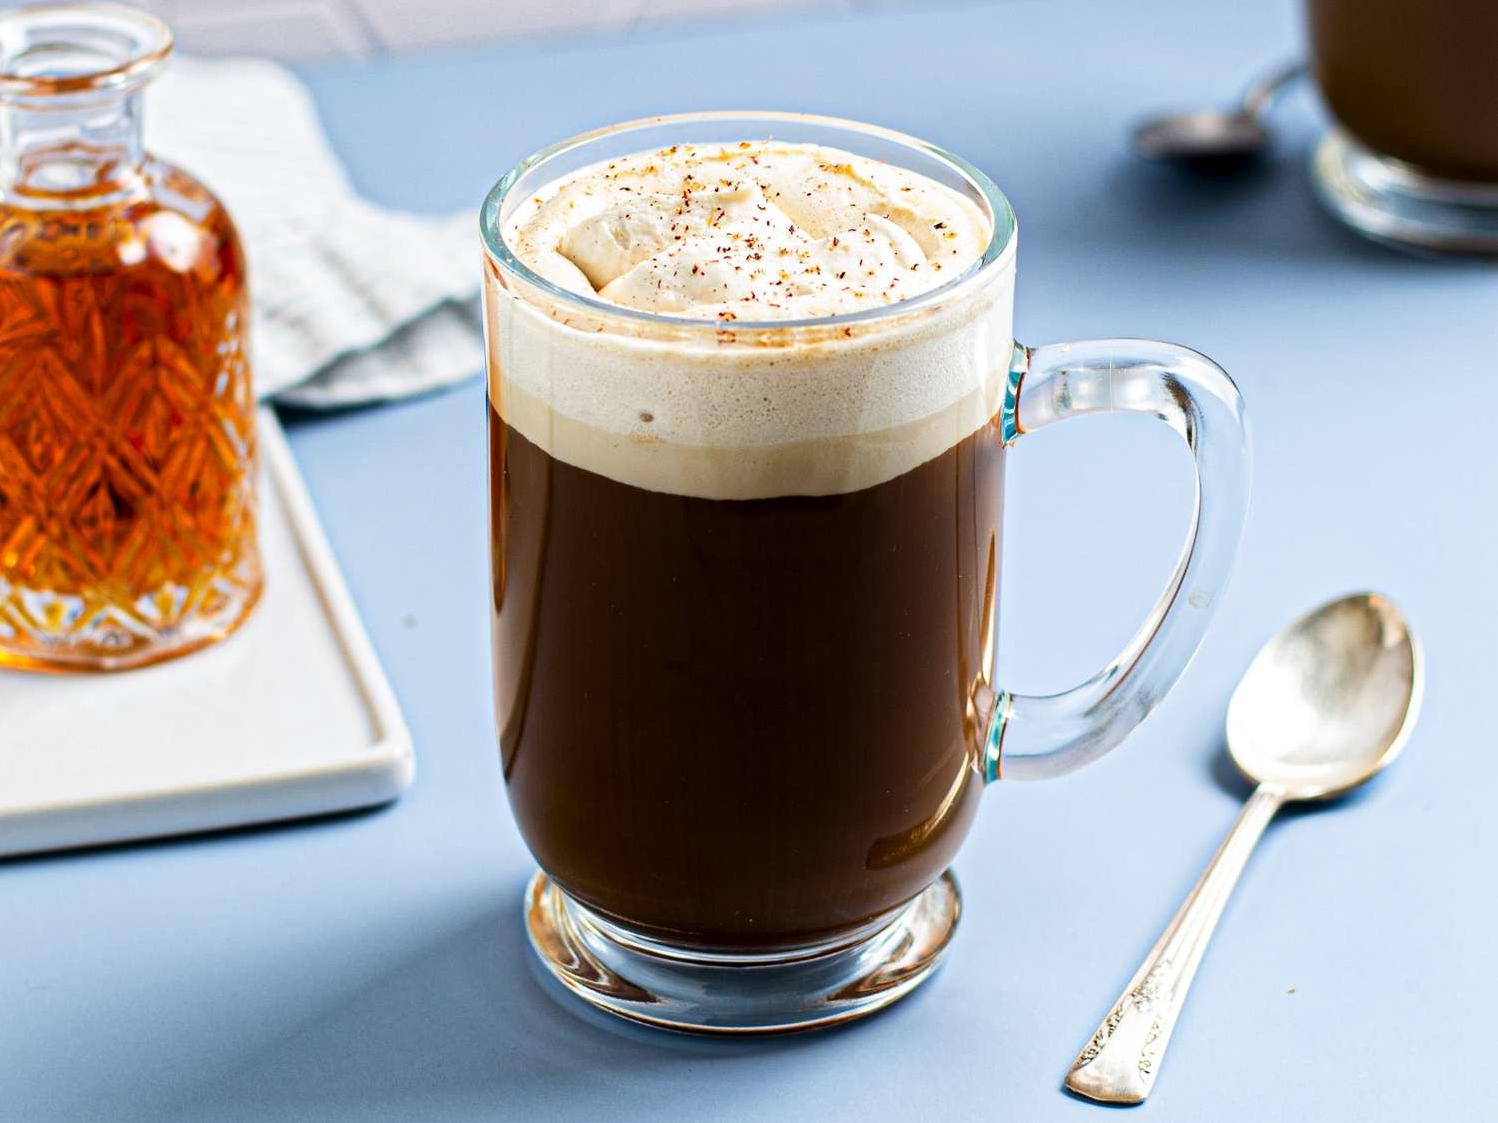  You don't have to go to an Irish pub to enjoy a good Irish Coffee anymore